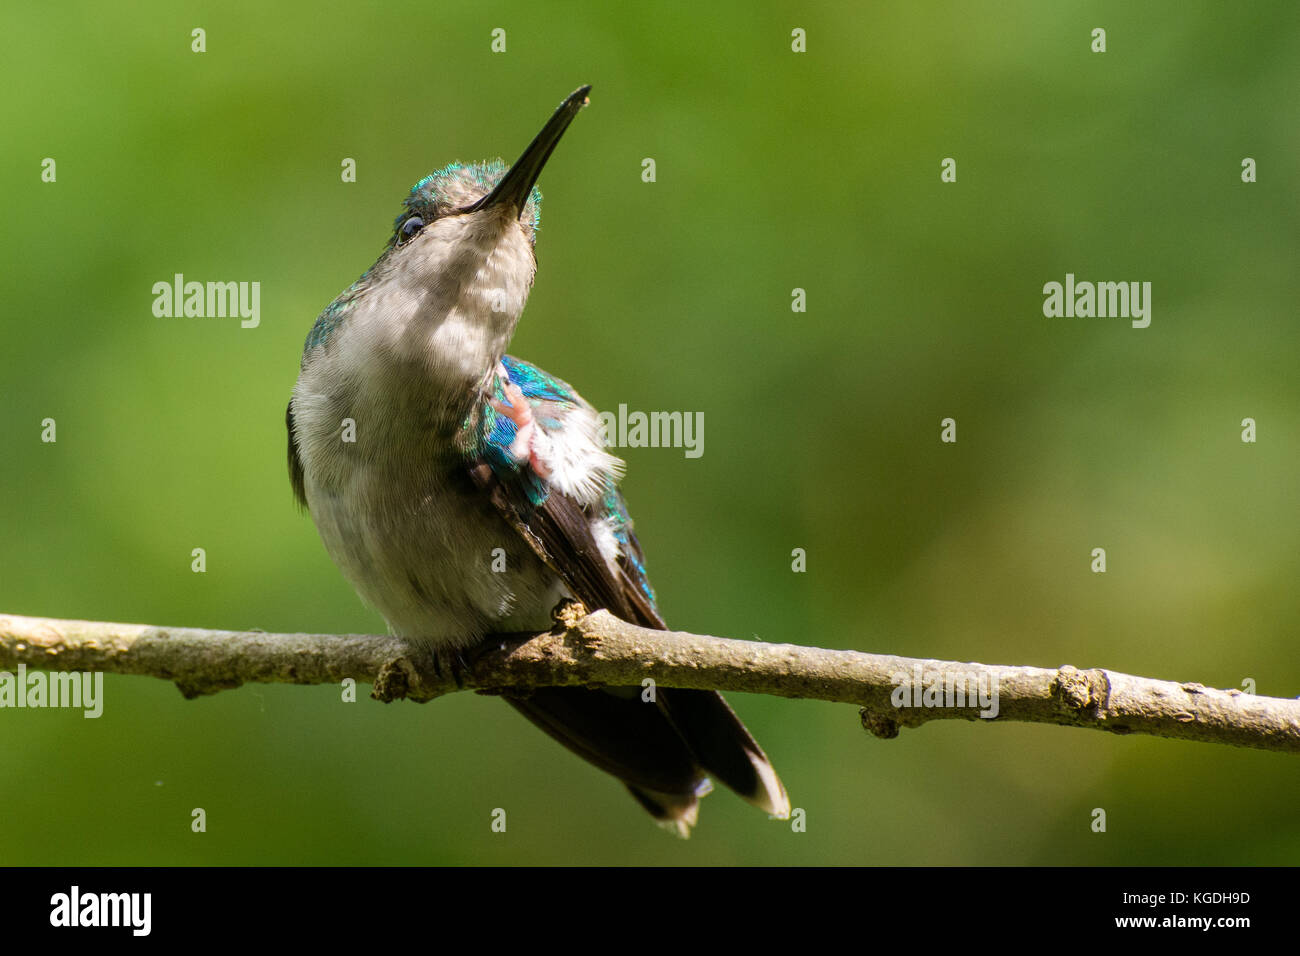 A hummingbird takes care of an itch while sitting on a branch. Stock Photo